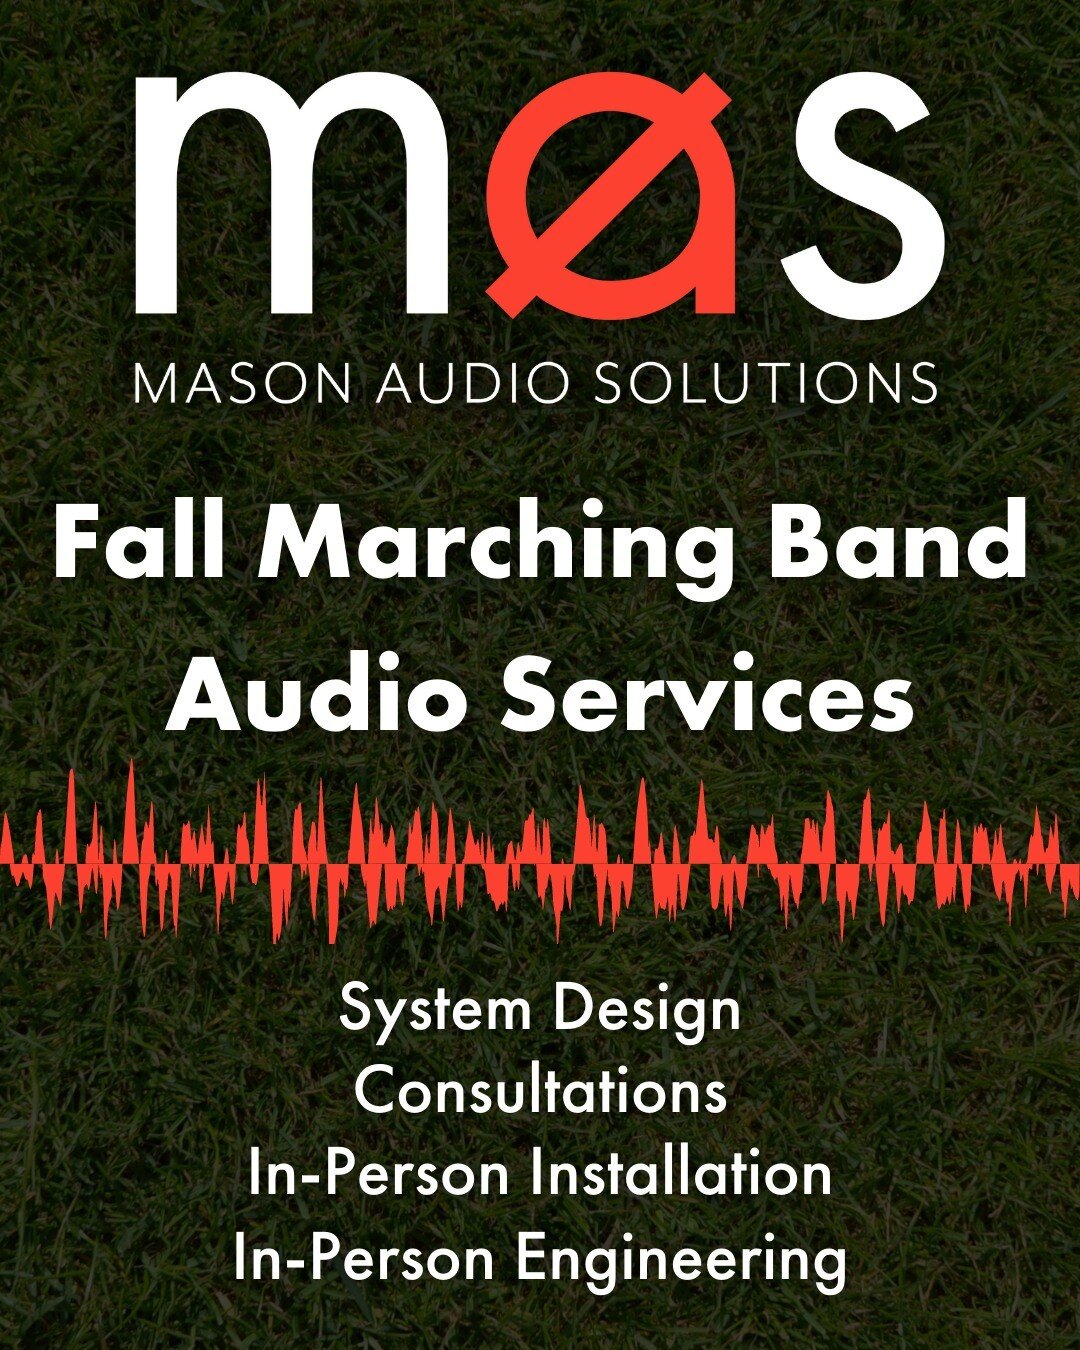 Now accepting new and returning clients for this upcoming Fall Marching Band Season! Take advantage of some incredible solutions MAS has to offer for your ensemble this year ➡️ solo.to/masonaudiosol.com

*Dates filling up quick!
.
.
.
#MAS #masonaudi